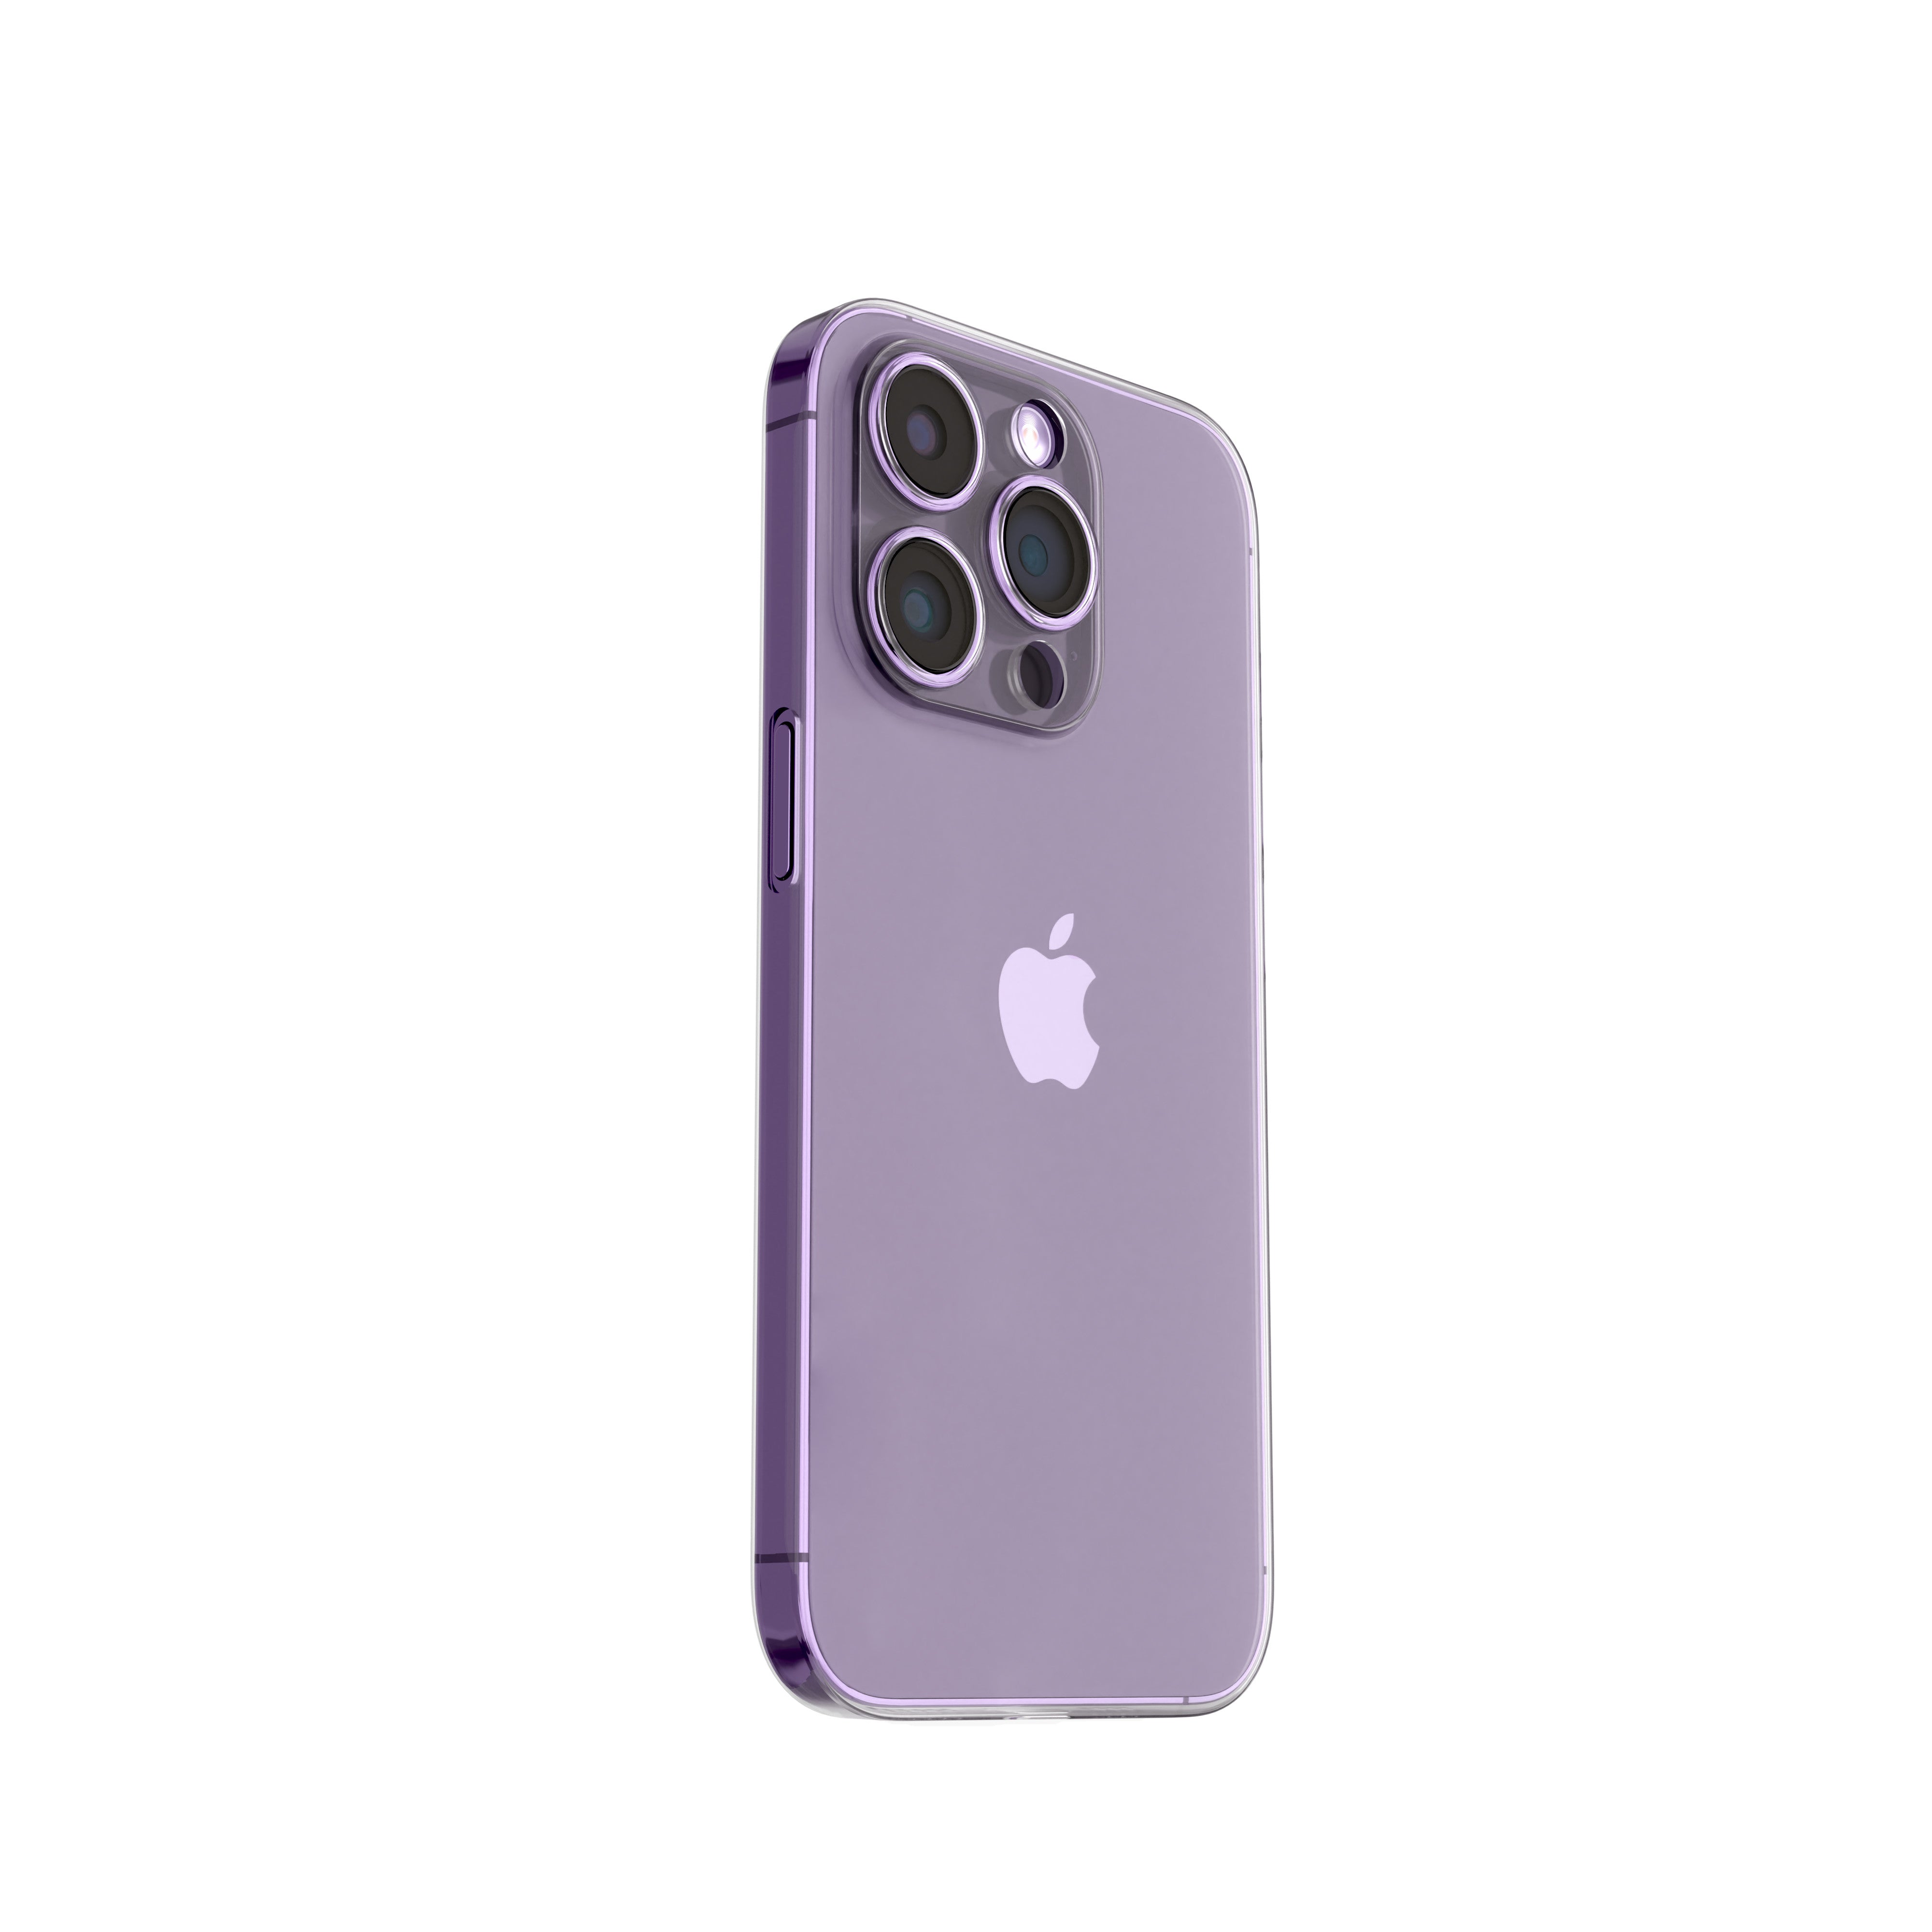 Slimcase Mobile Back Cover for iPhone 14 Pro